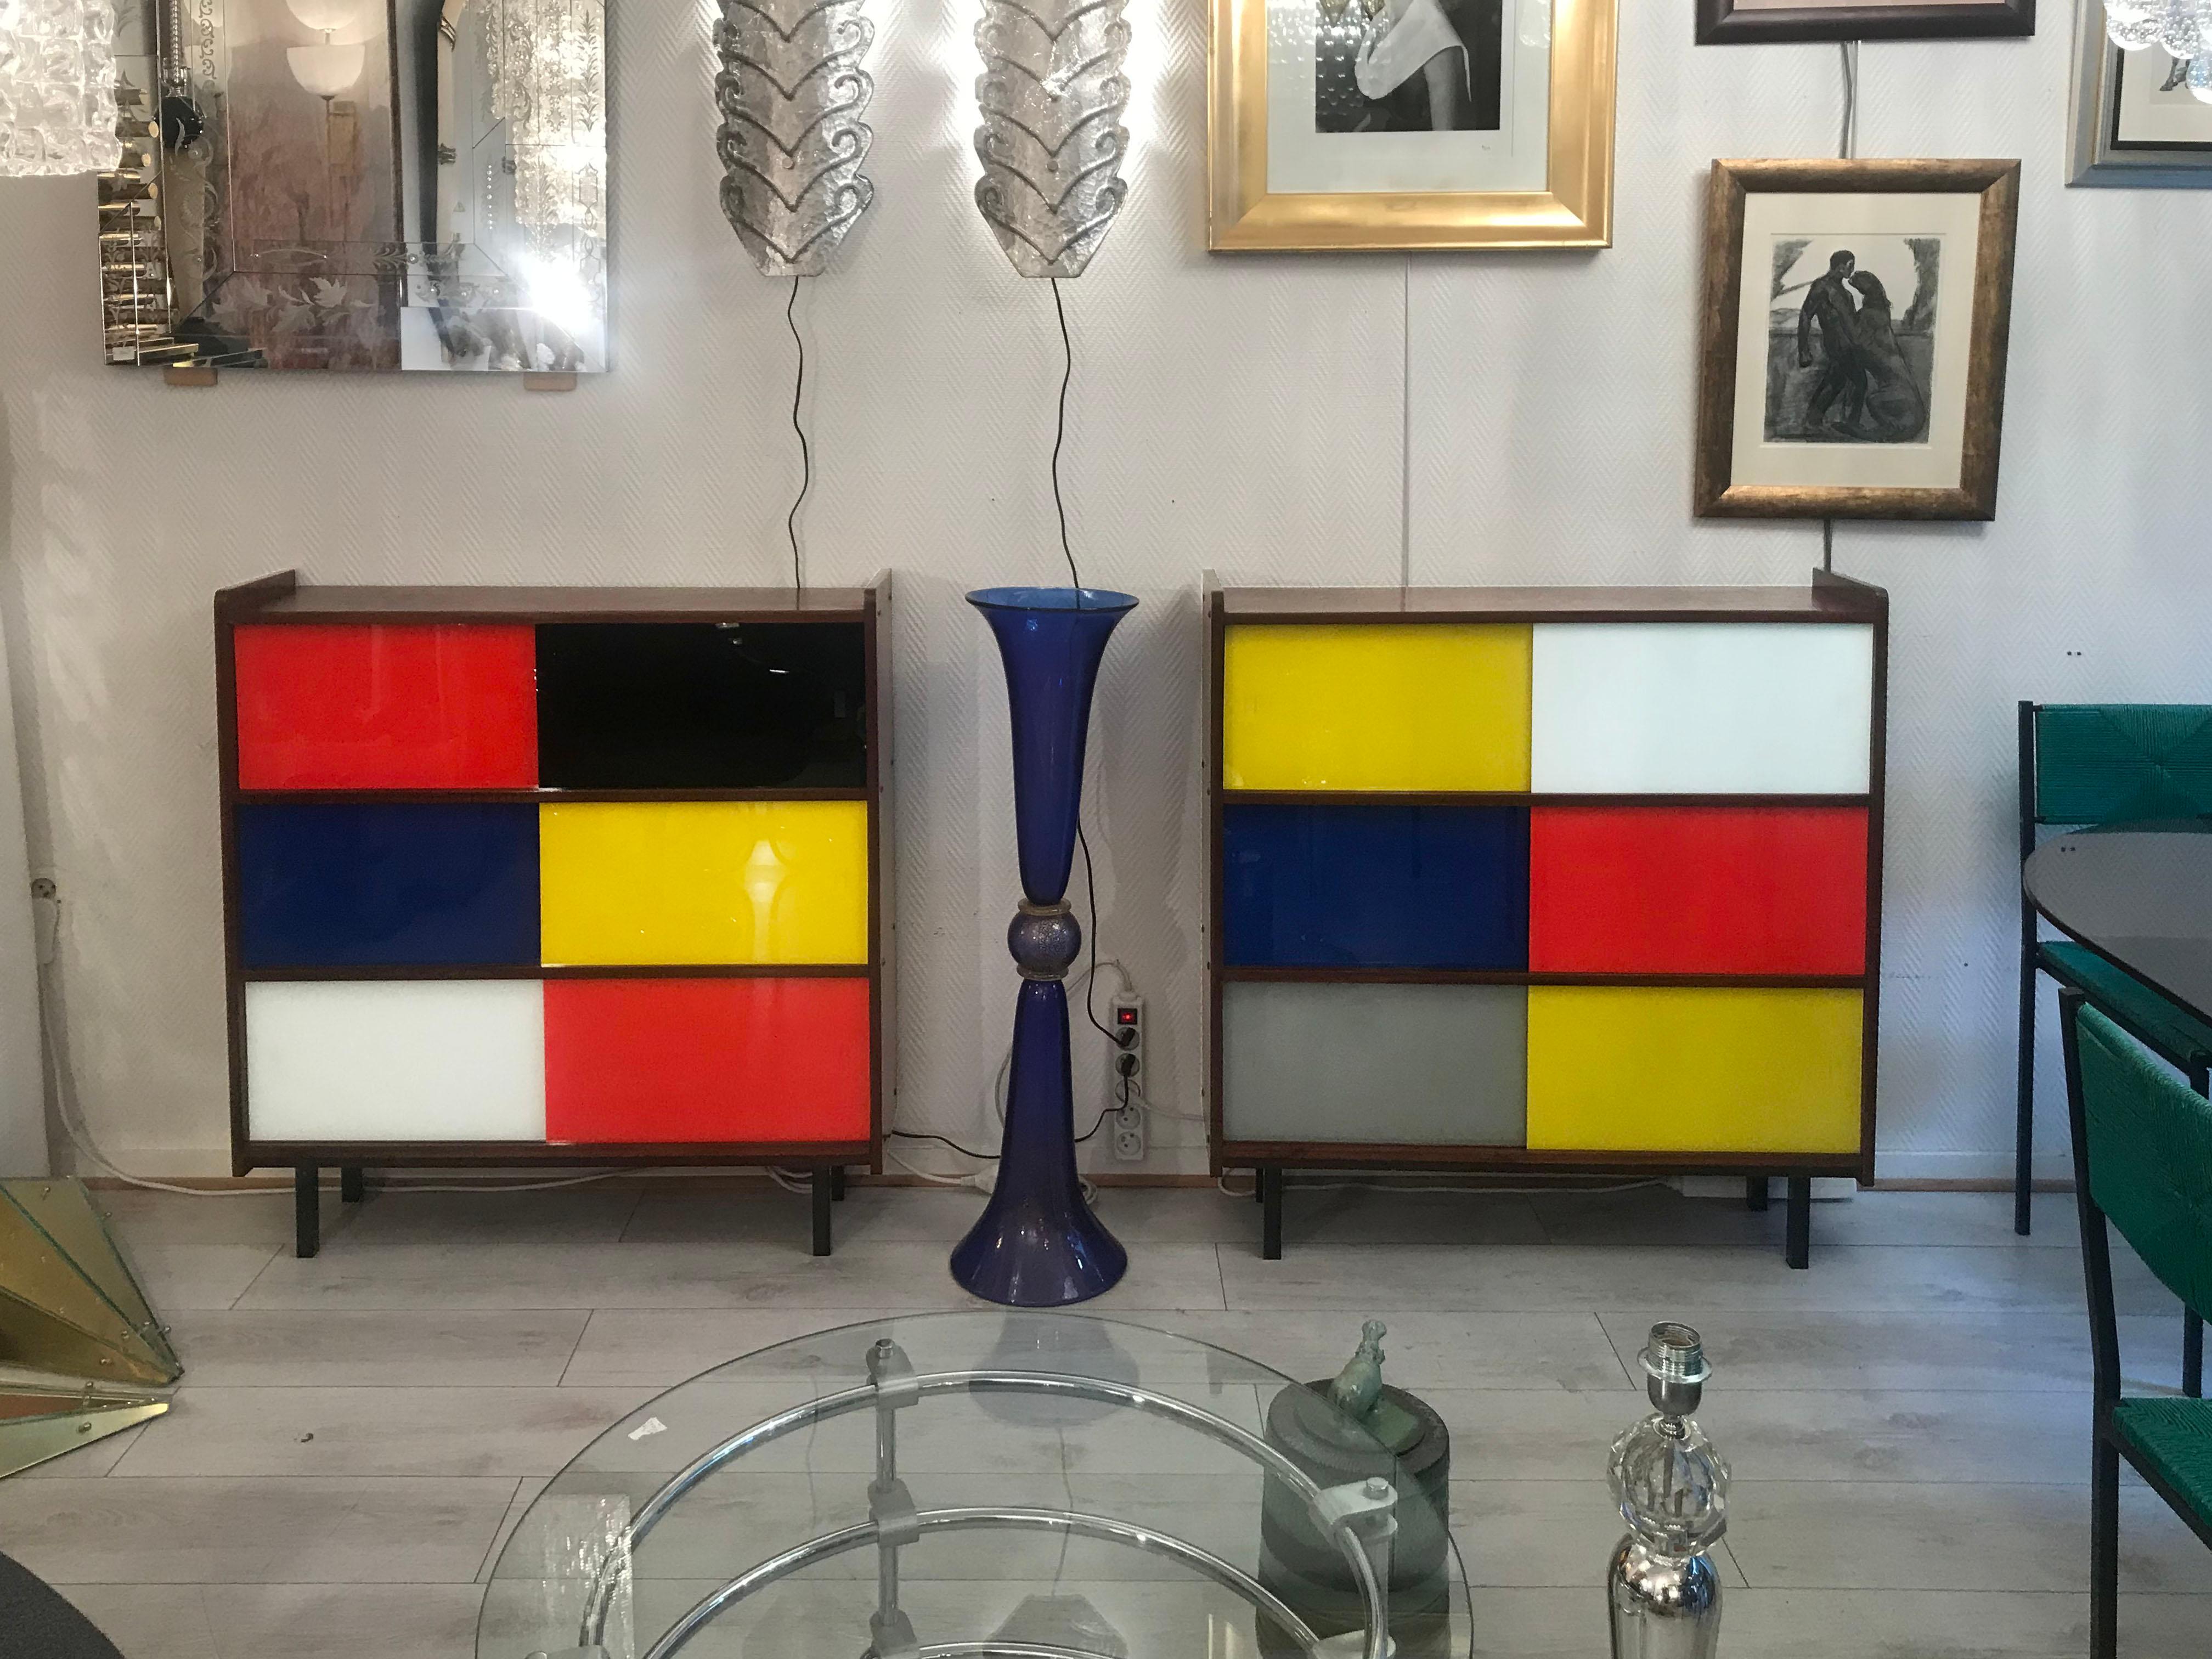 Pair of small storage furniture in De Stijl or Mondrian style.
Mahogany and tinted glass.
Measures: W 94 x H 102 x D 25 cm,
circa 1960
Perfect condition
Pair at 2500 euros.